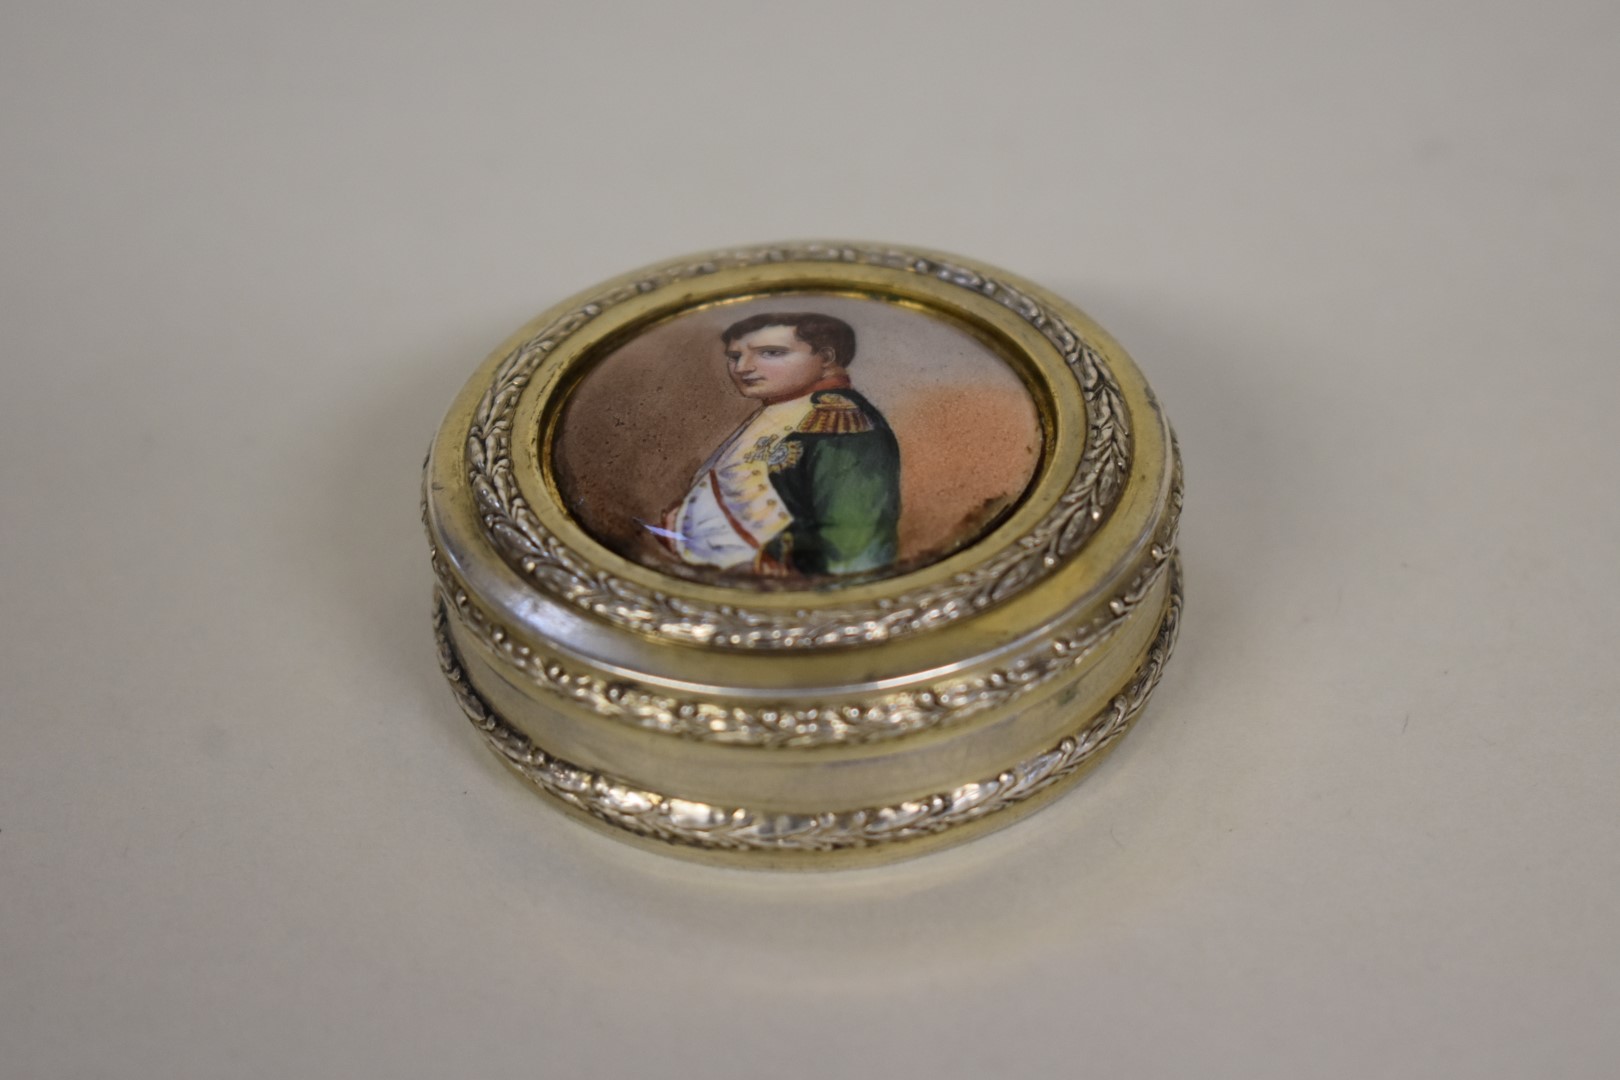 A French silver gilt snuff box,Â by Edouard Clerc, the lid setÂ porcelain plaque depicting - Image 2 of 3